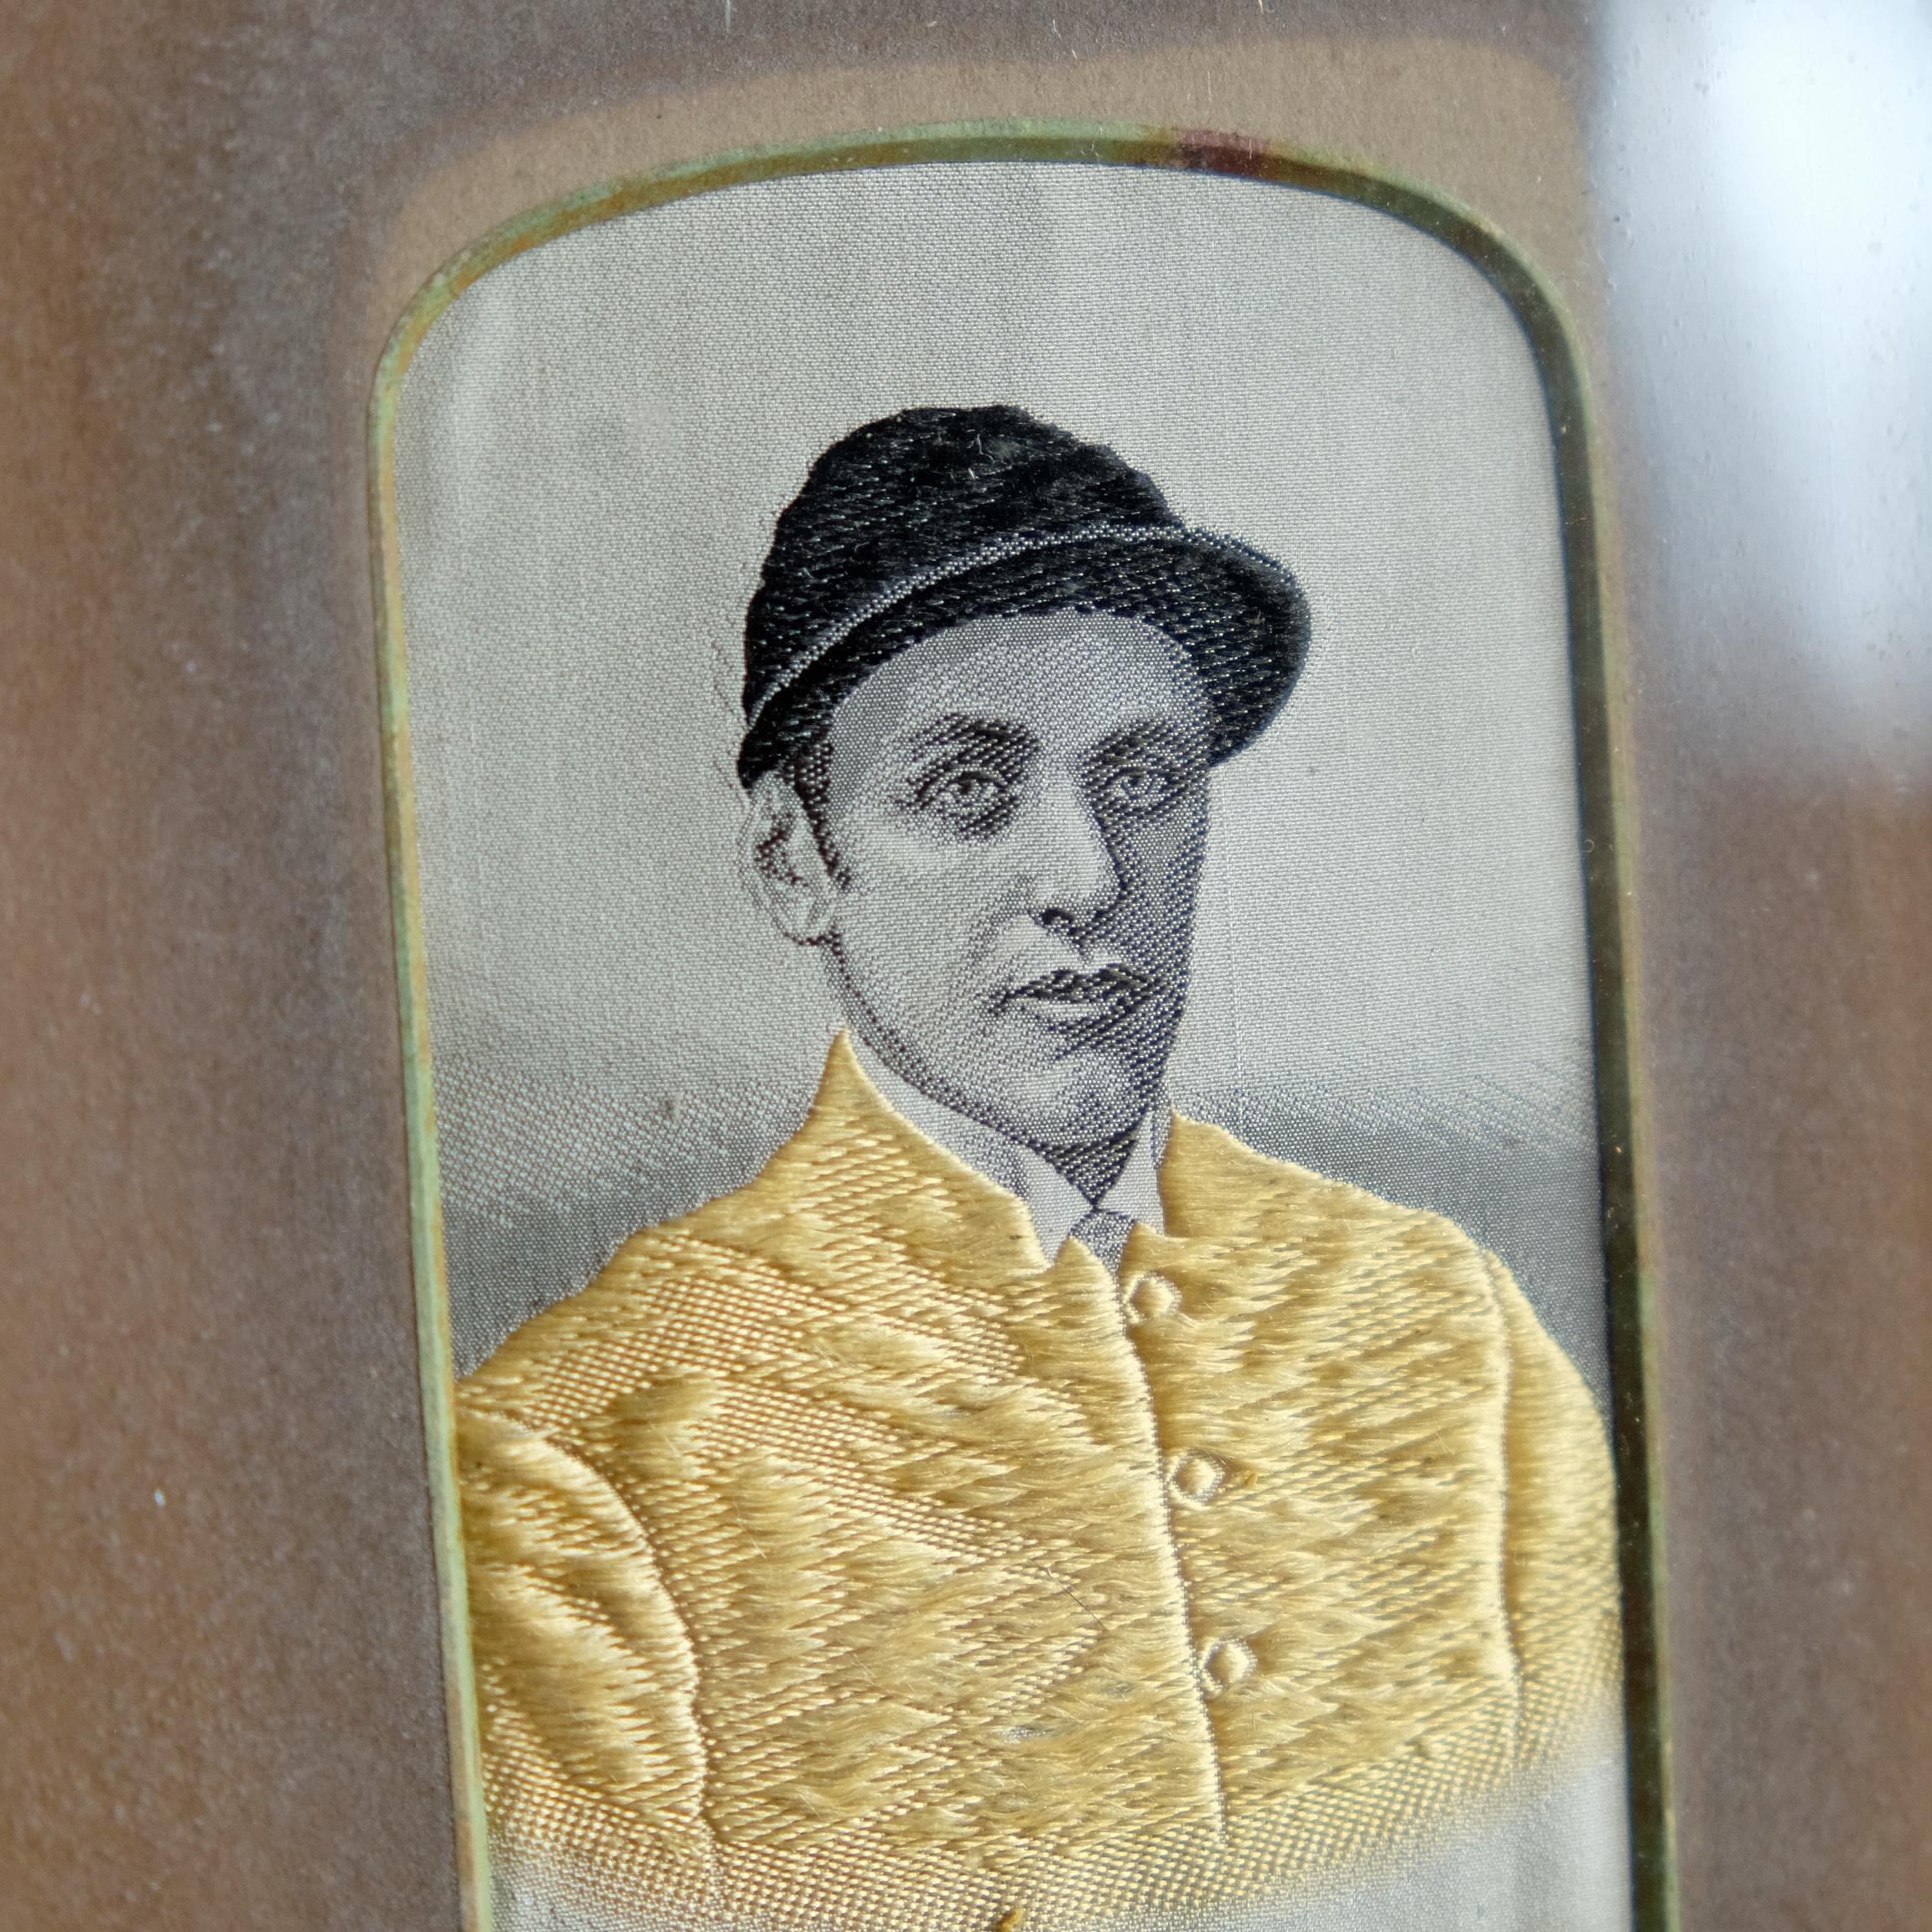 Victorian stevengraph of 19th century jockey, Fred Archer wearing solid yellow which is was the King’s colors.
Originated by Thomas Stevens around 1862, a stevengraph is simply a picture made from woven silk. The image is drawn or printed onto a